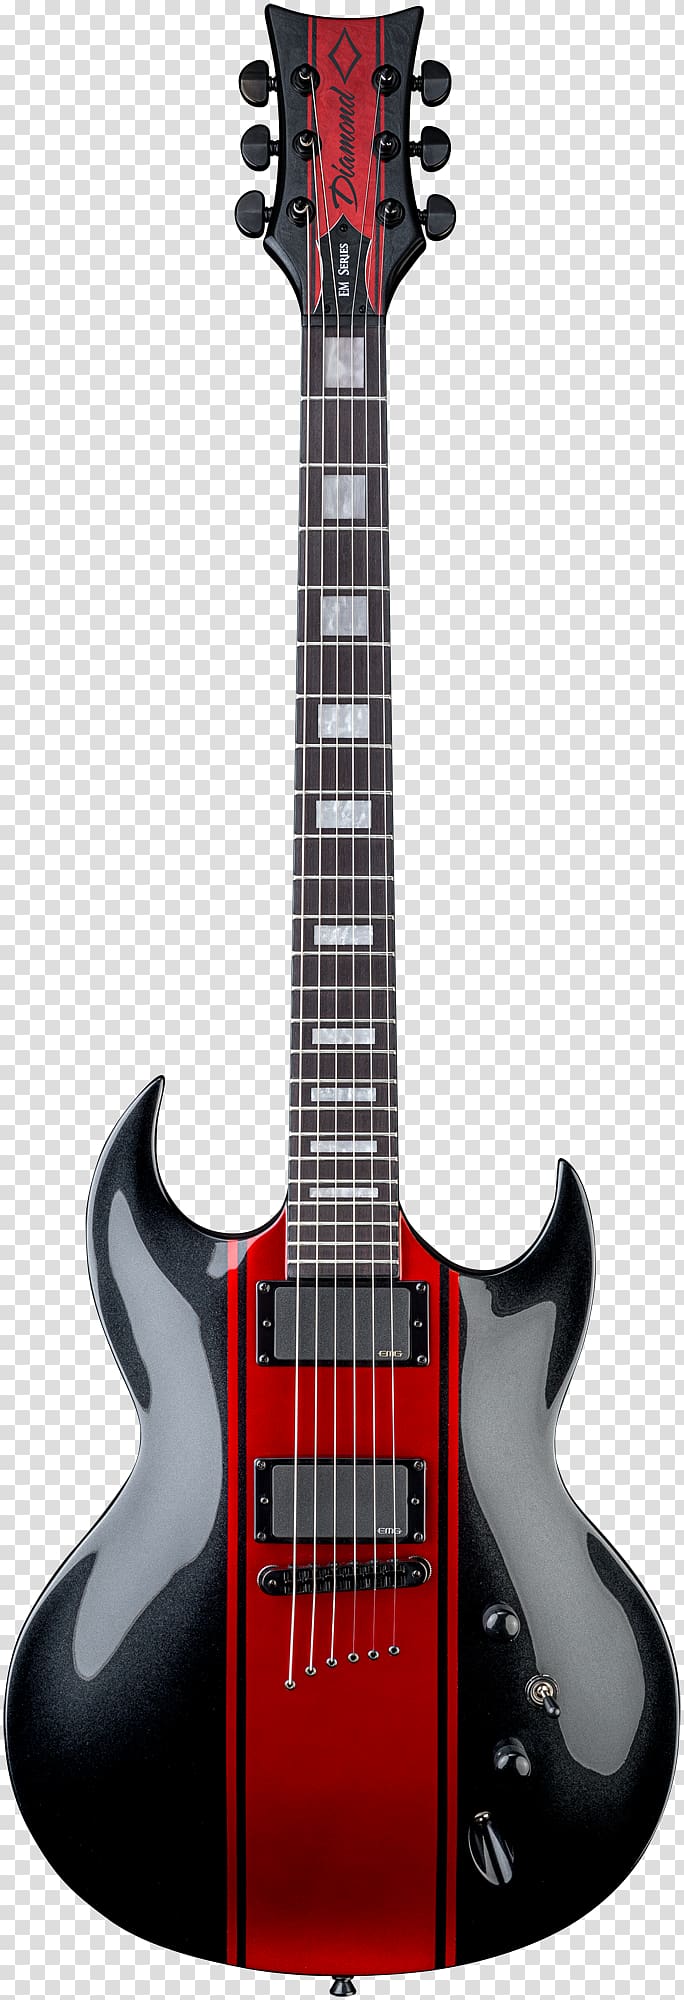 Electric guitar Floyd Rose Fingerboard Neck-through, electric guitar transparent background PNG clipart